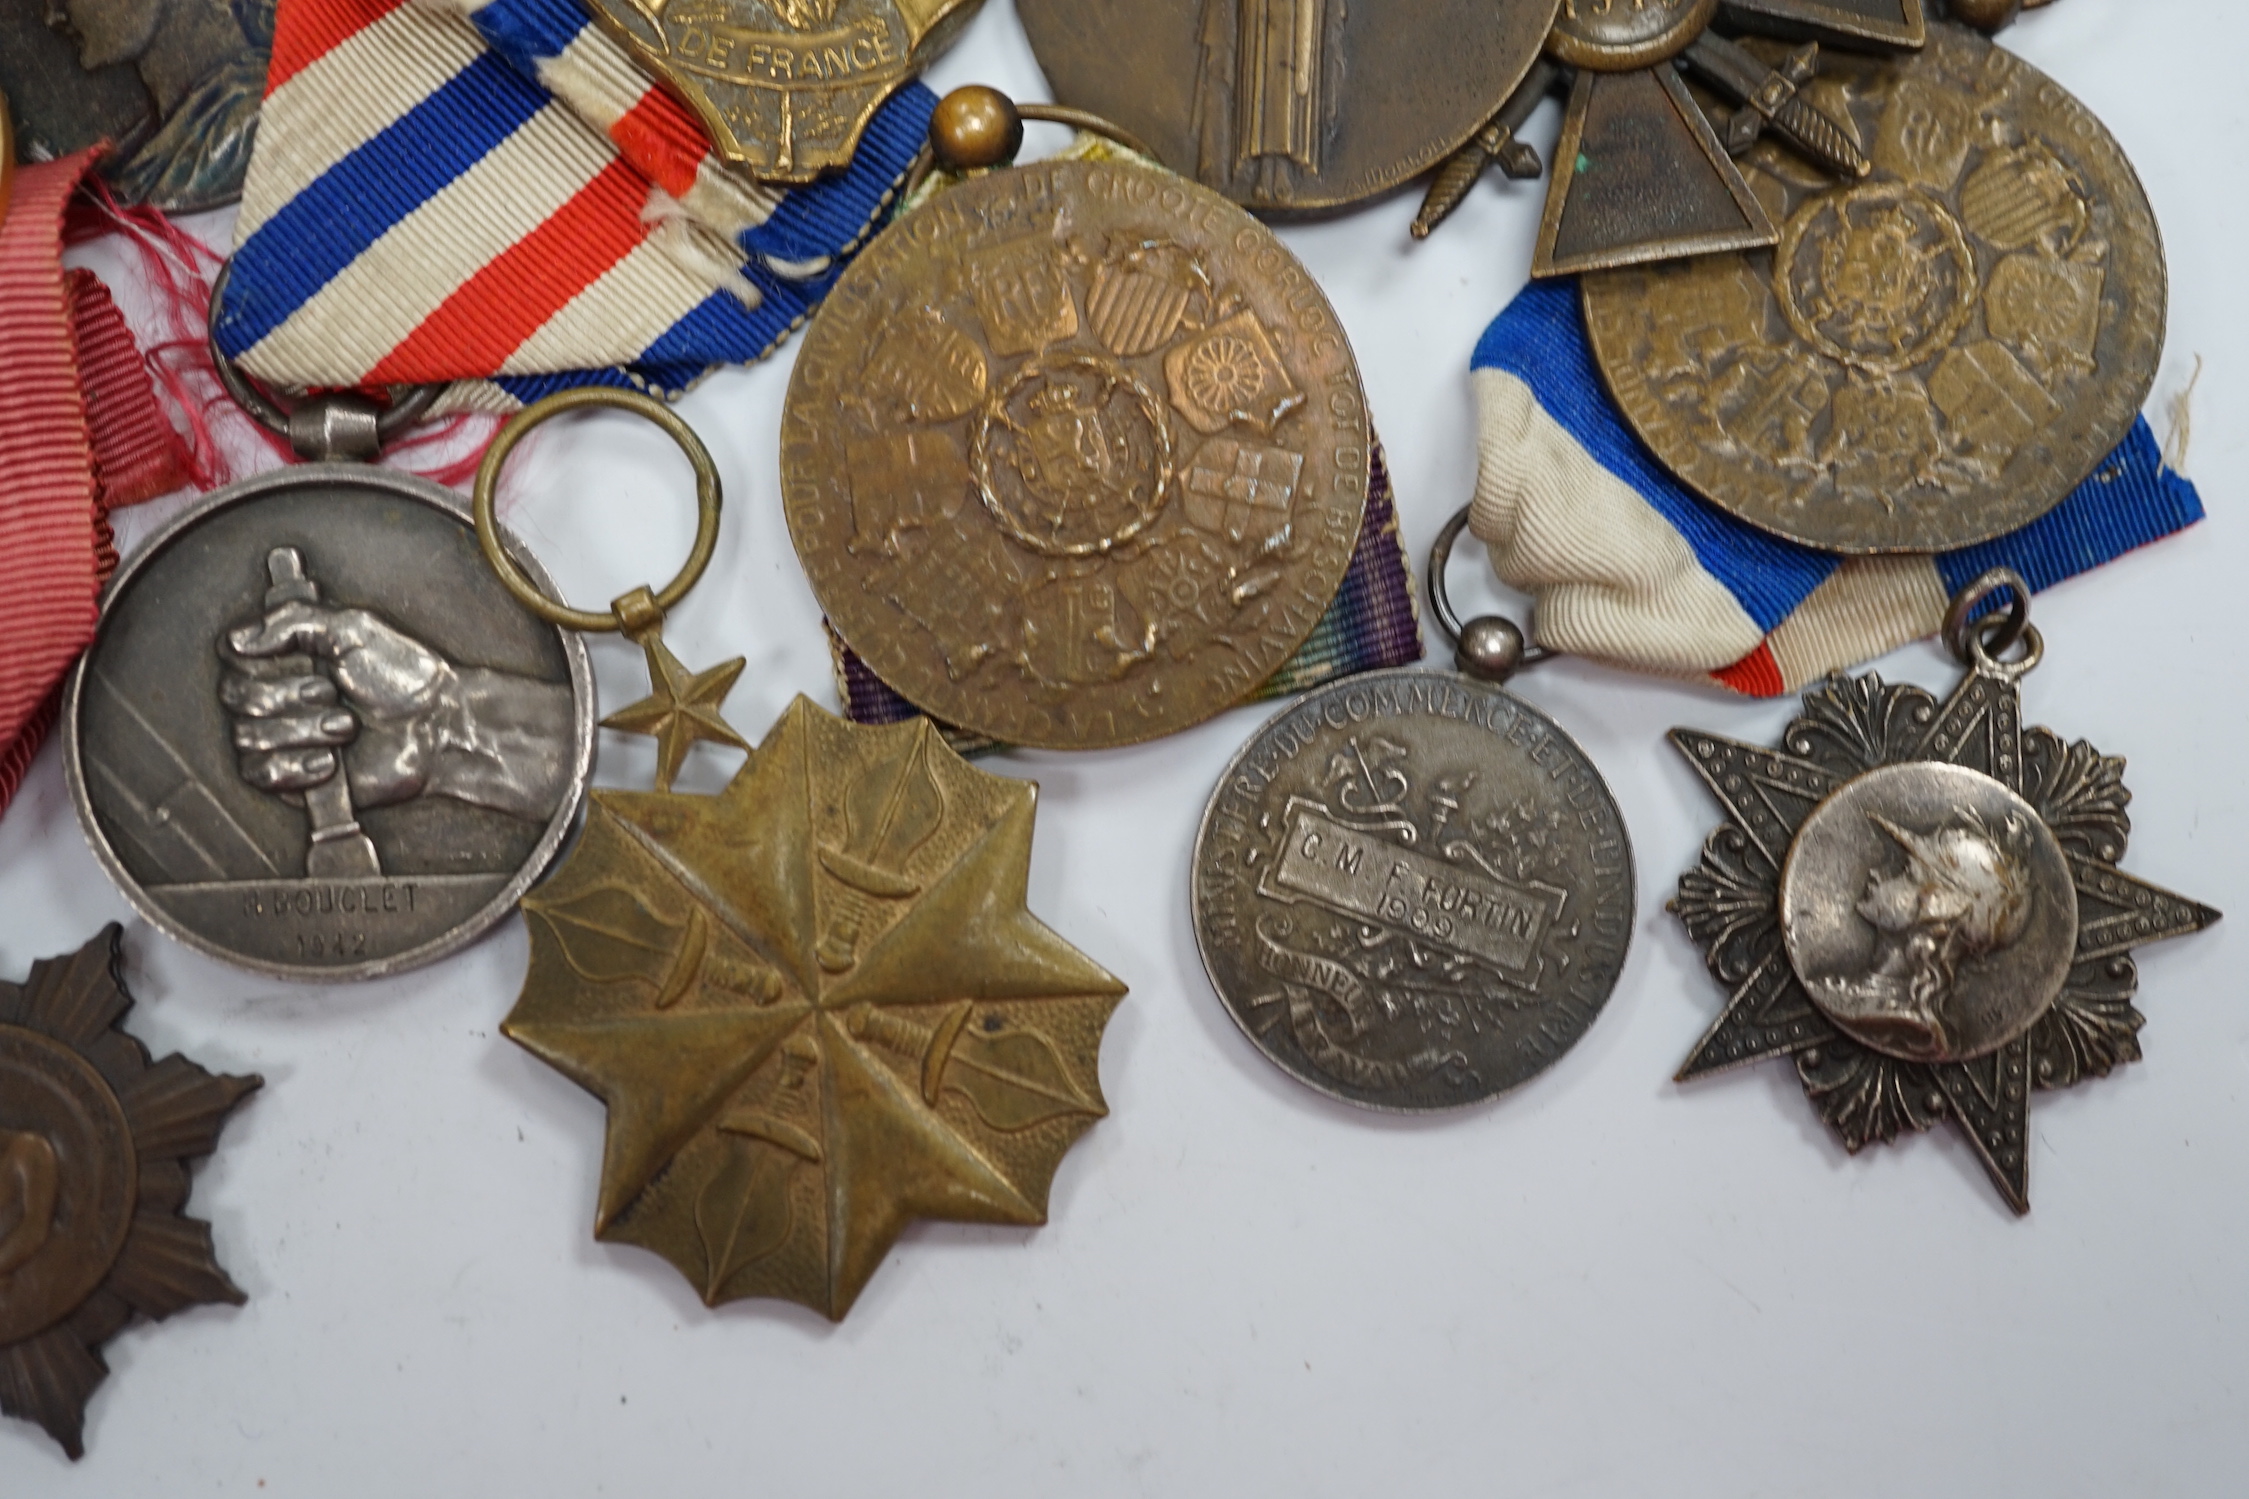 Eighteen French and Belgium medals, etc. including; Medal of Honour, War Cross, Medal of Honour - Image 12 of 17